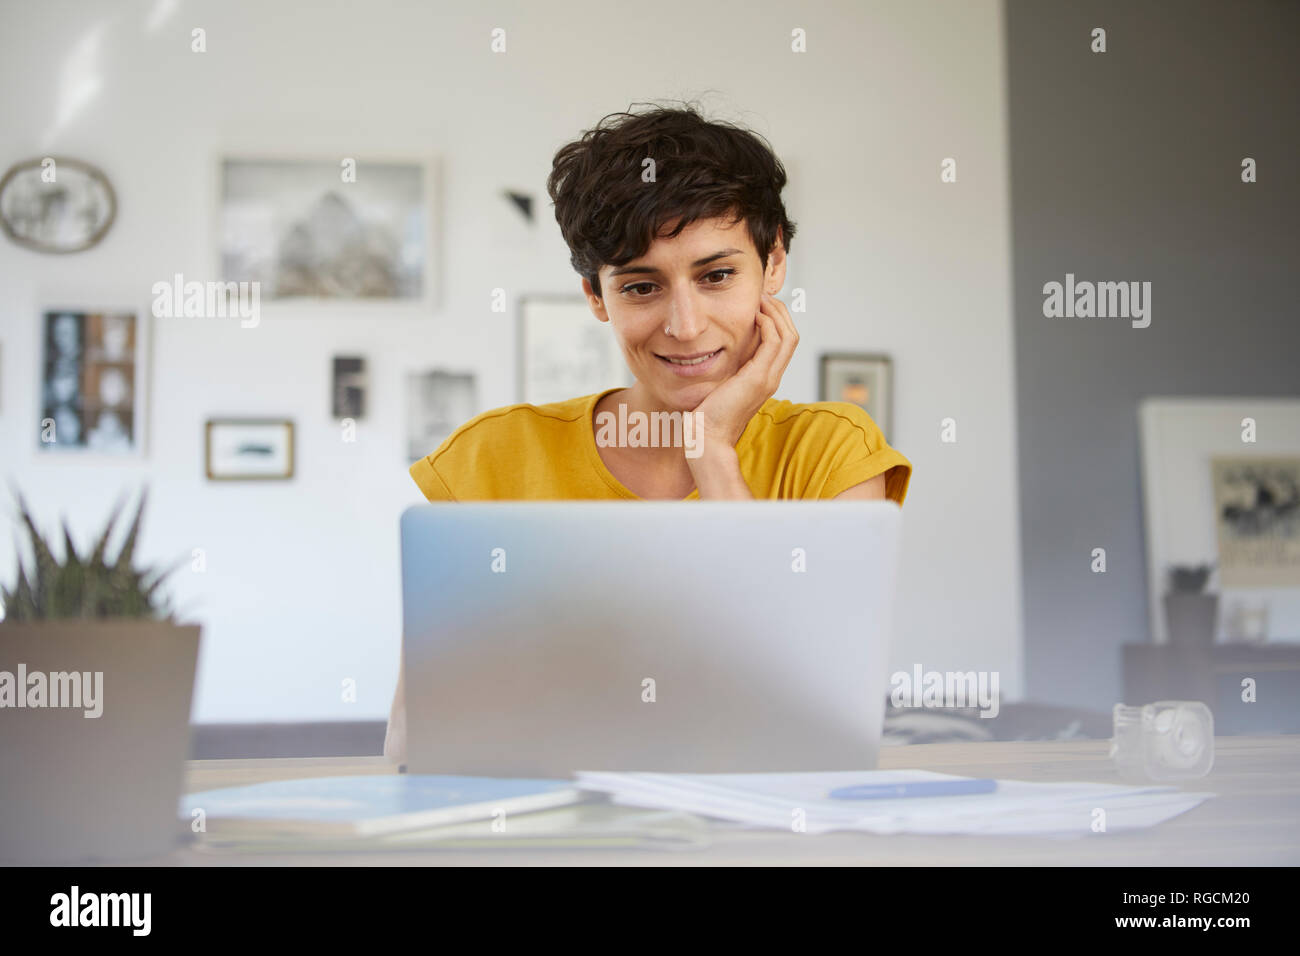 Portrait of smiling woman at home sitting at table using laptop Stock Photo